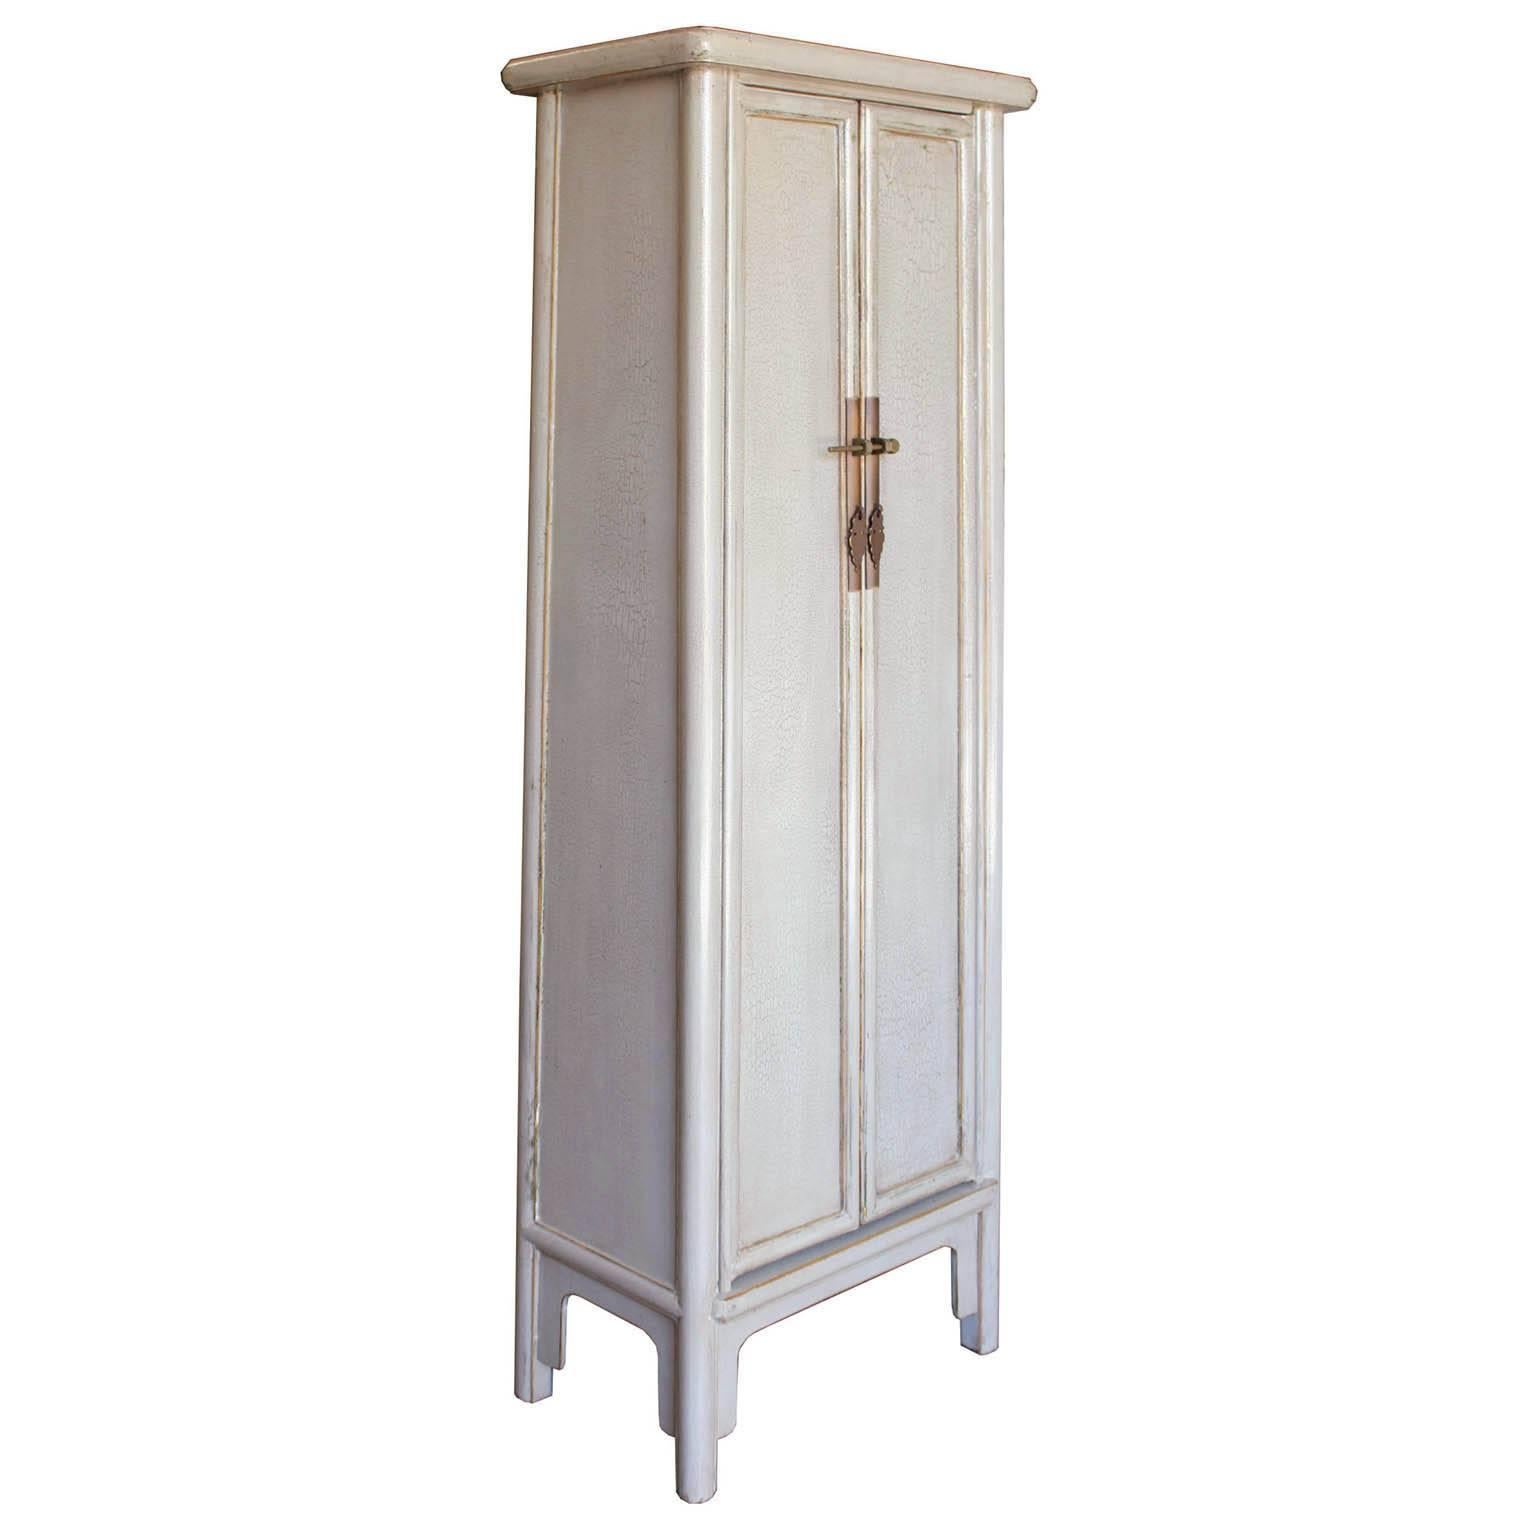 Contemporary a-line chest with light gray crackle finish can be placed at the end of a hallway or in bathroom for extra storage.